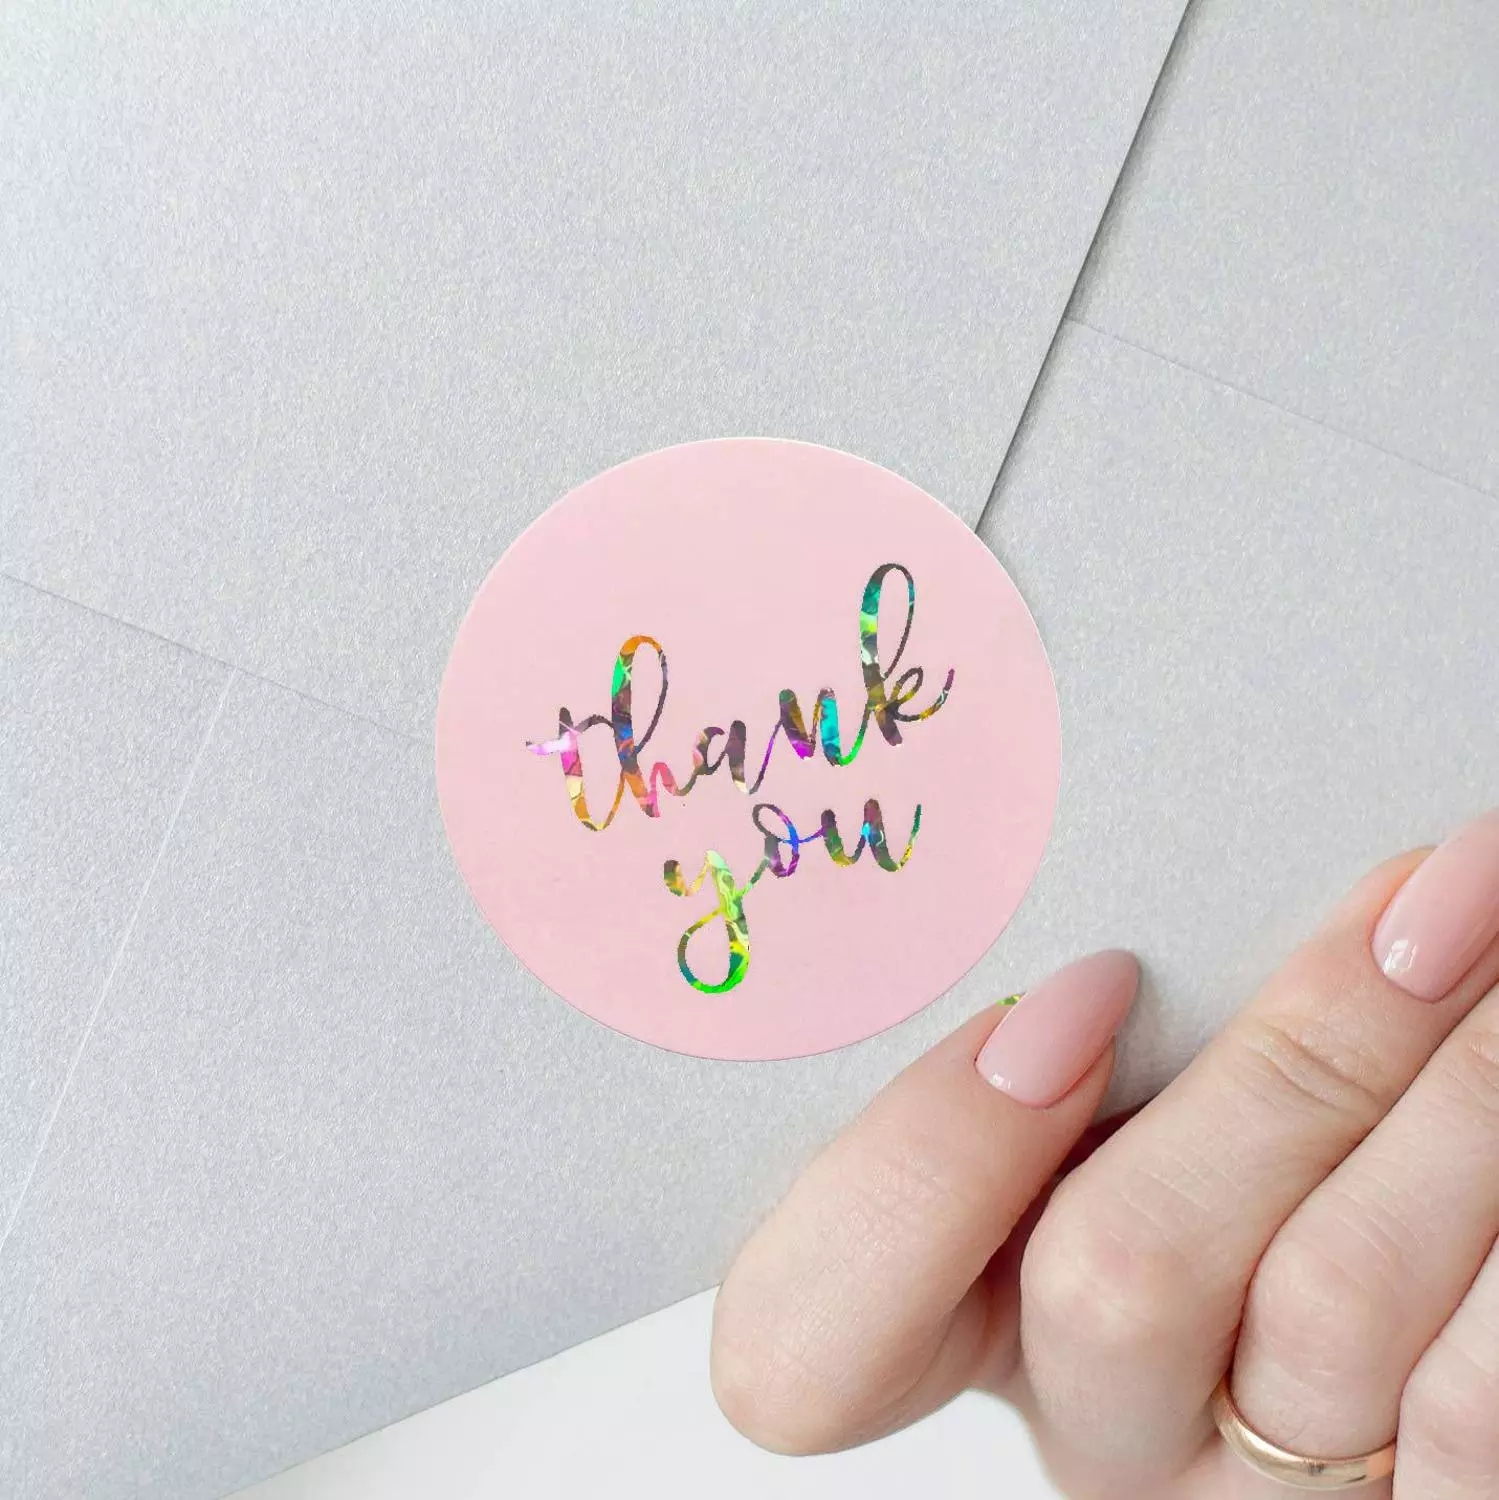 Custom Printed Adhesive Stationery Sticker Laser Thank You Paper Labels for Packaging Water Bottles Gifts Sealing Envelopes 